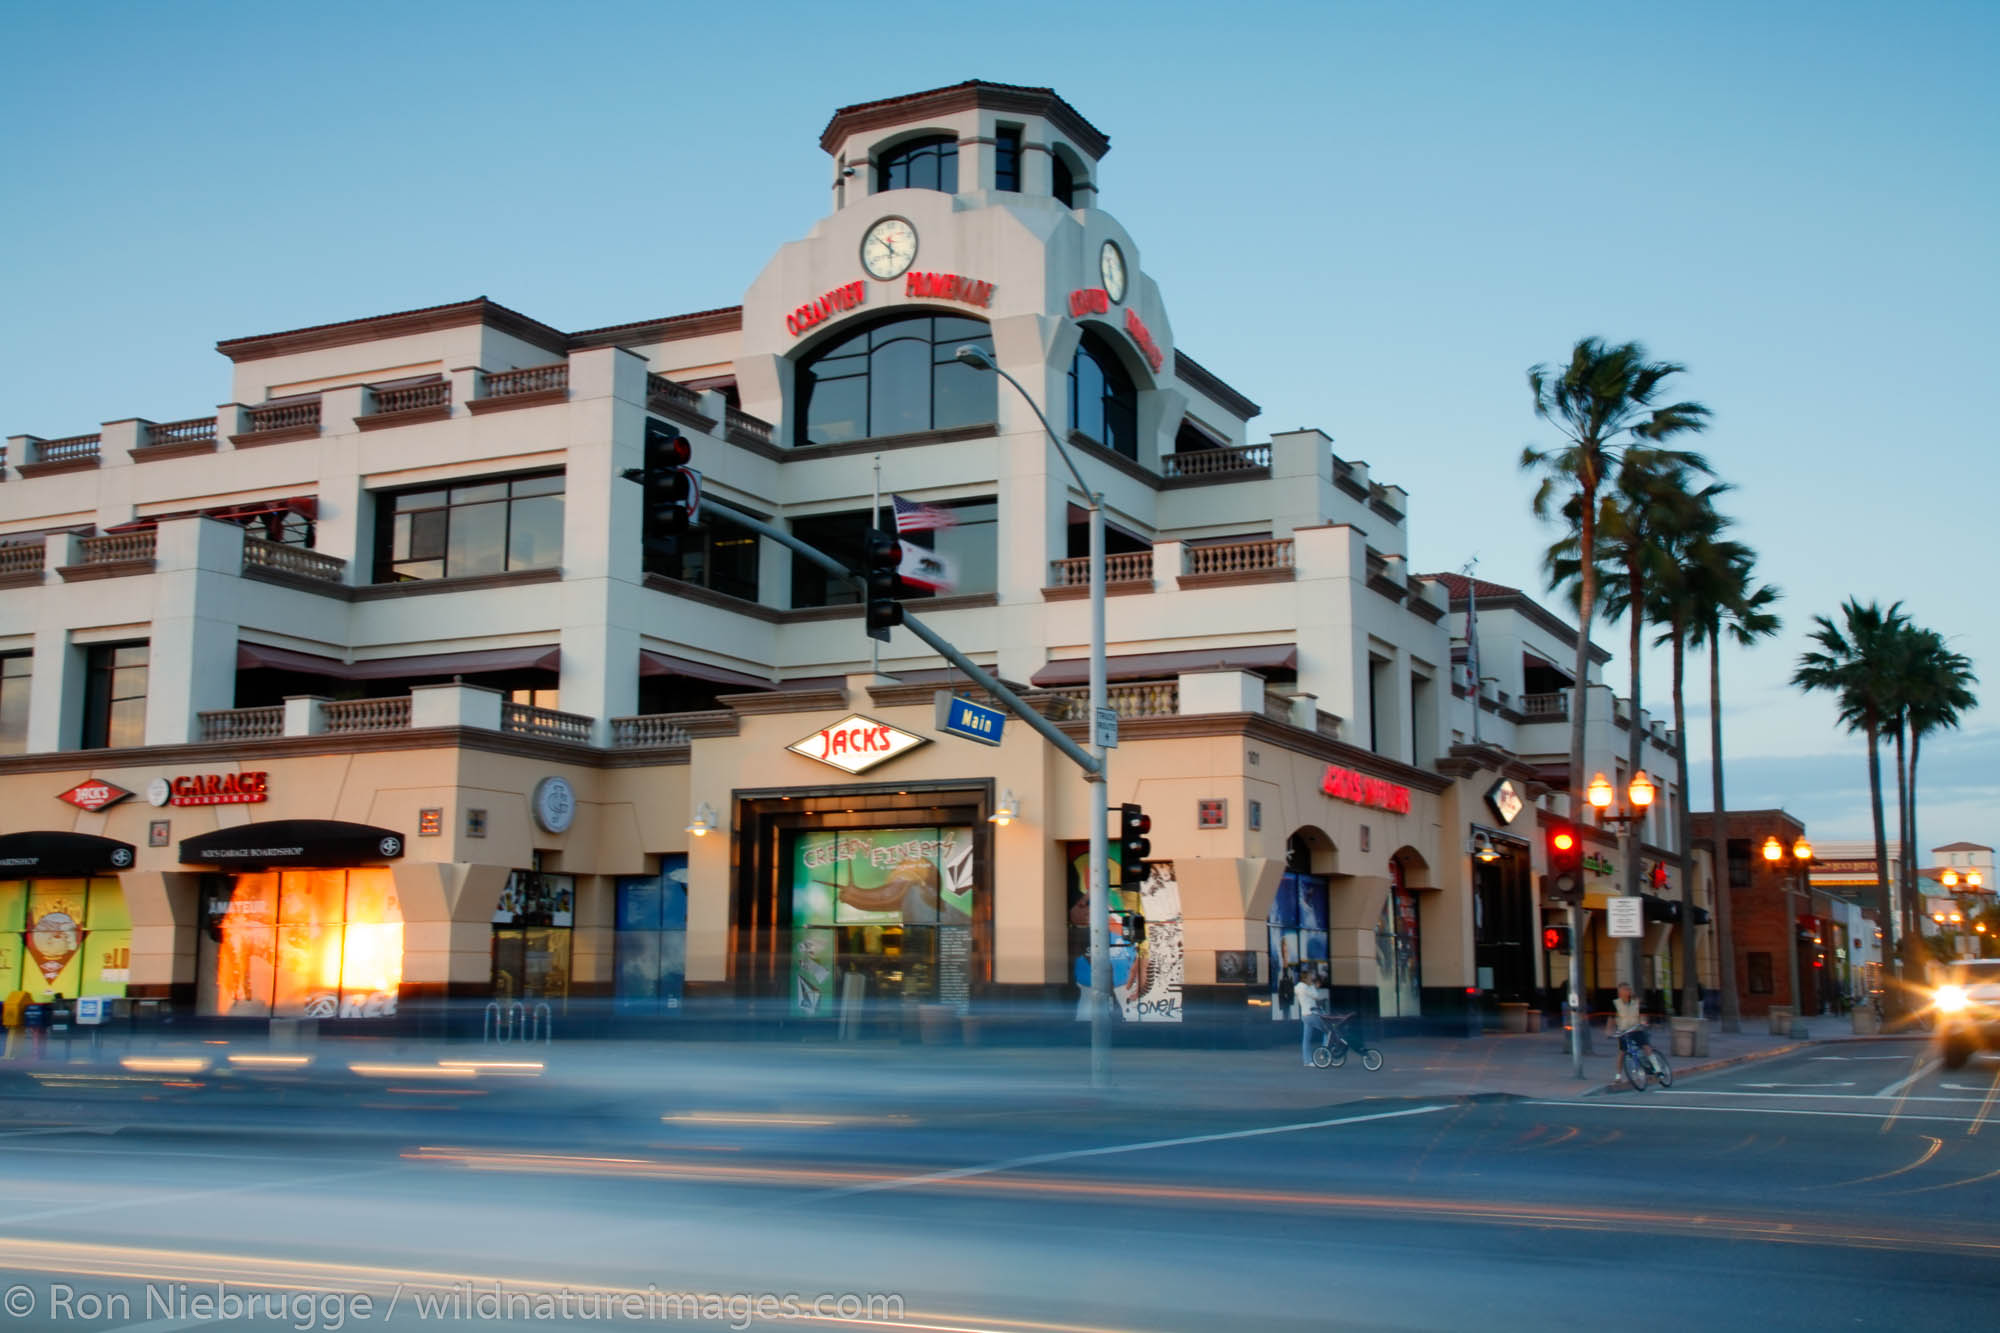 Stores, including Jack's Surf Shop along PCH in Huntington Beach, Orange County, California.